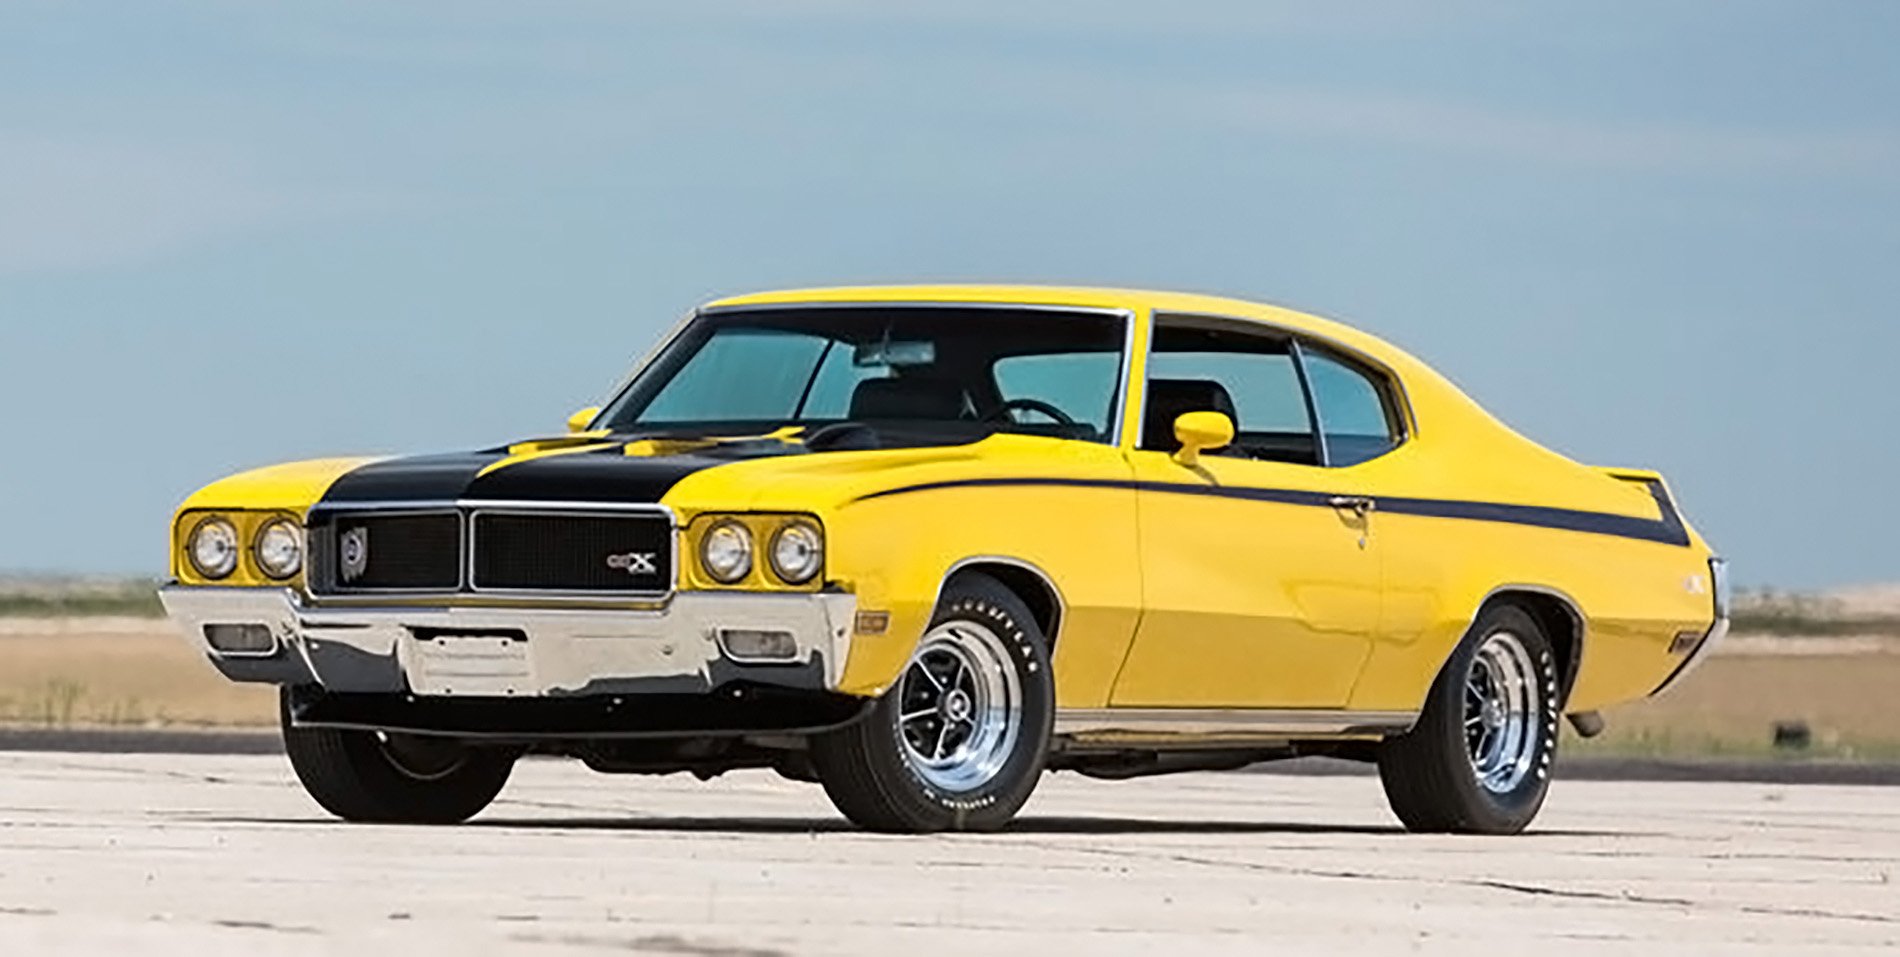 Rare Rides: The 1970 Buick GSX And GSX Stage 1